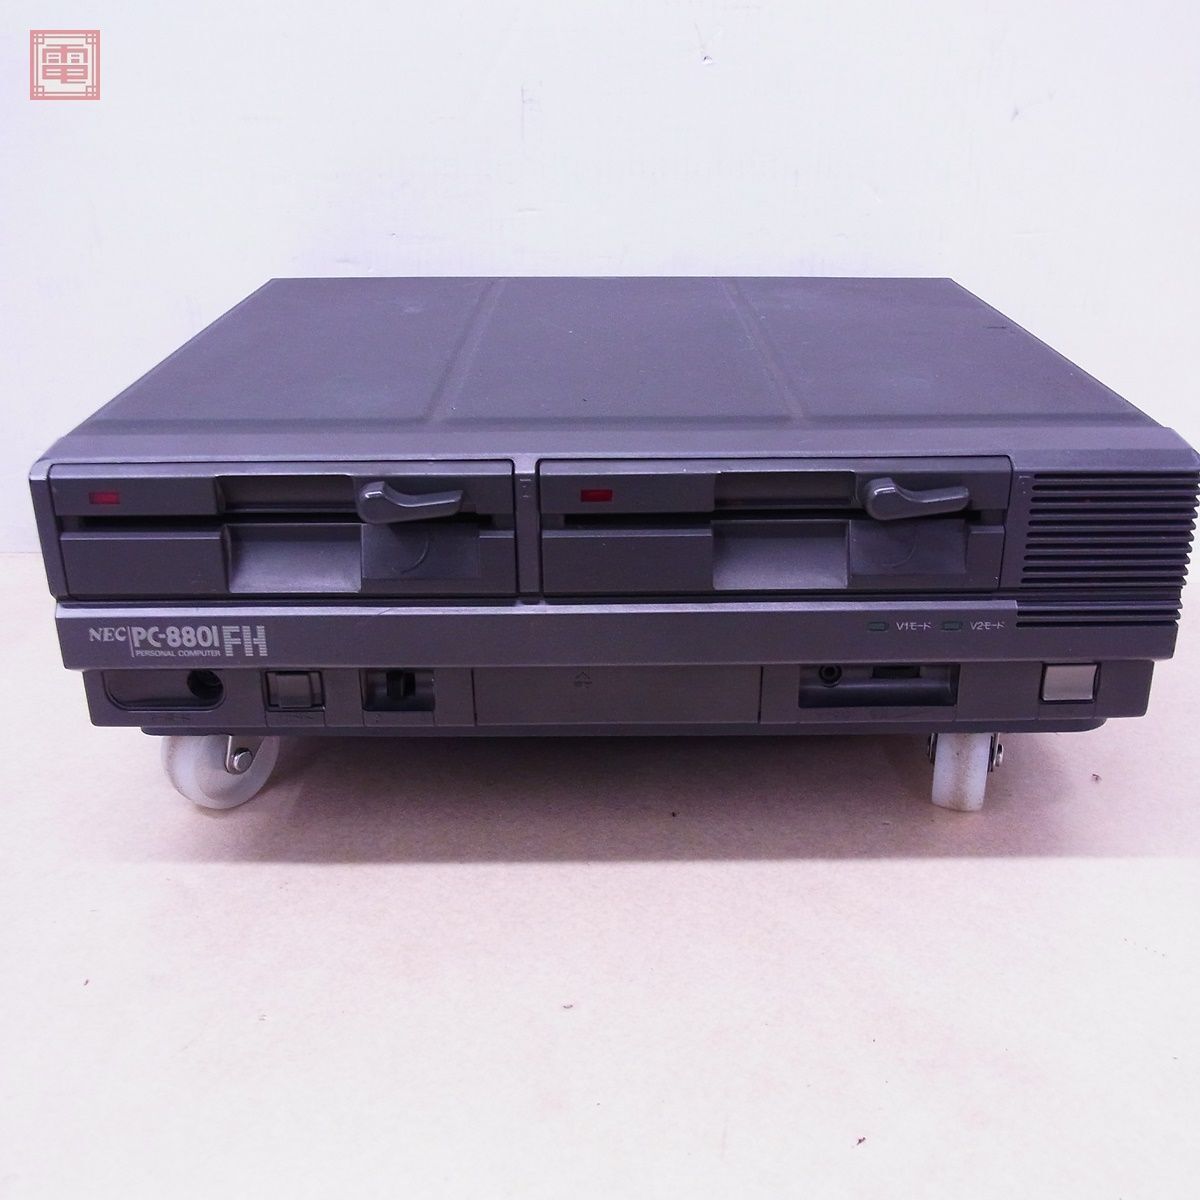 1 jpy ~ operation goods NEC PC-8801FH body black type FD* freebie soft attaching Japan electric [40